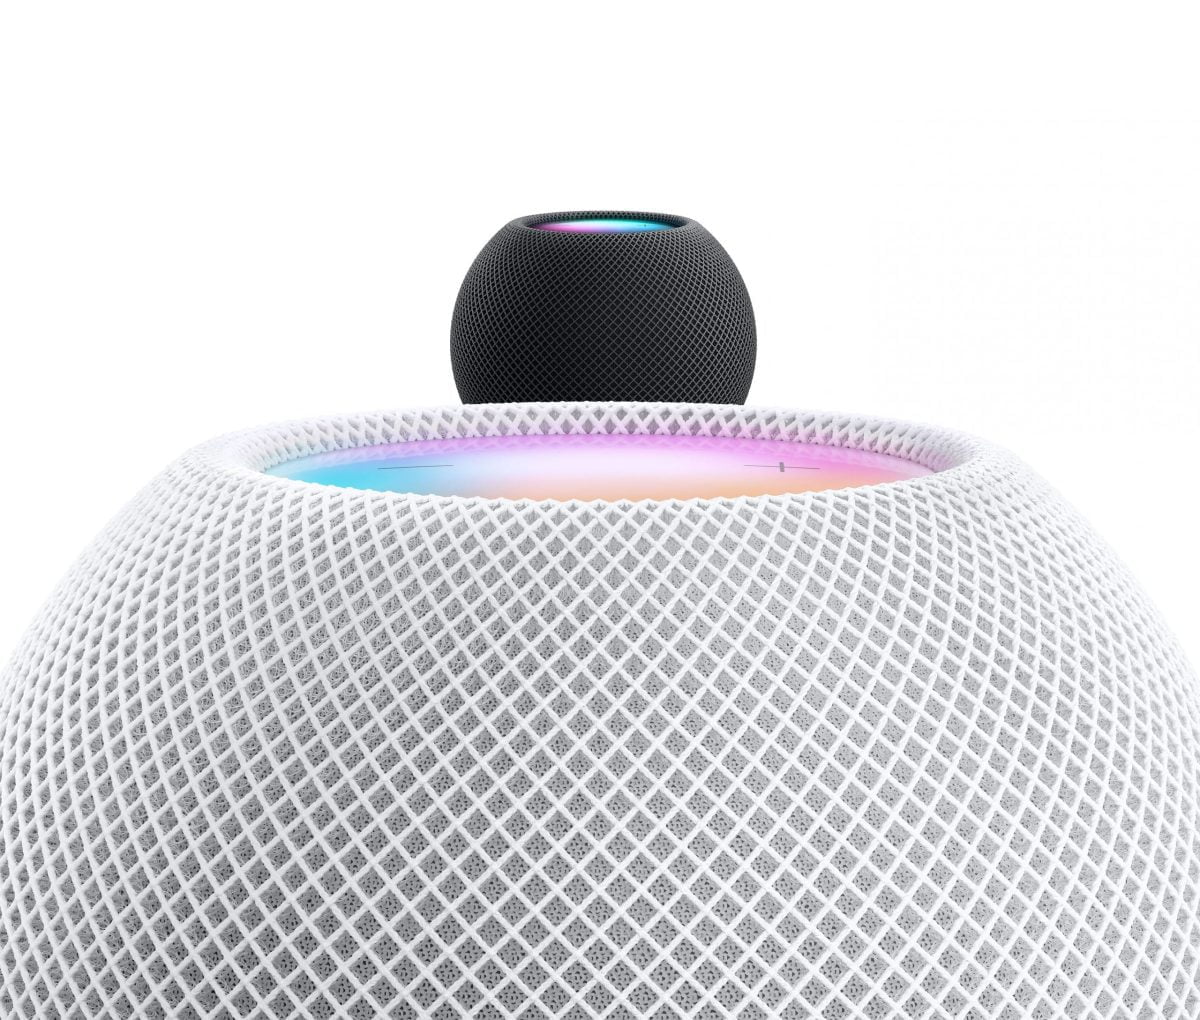 Homepod Mini Gallery 1 Scaled Apple &Lt;H1&Gt;Apple Homepod Mini Space Gray&Lt;/H1&Gt; Jam-Packed With Innovation, Homepod Mini Fills The Entire Room With Rich 360-Degree Audio. Place Multiple Speakers Around The House For A Connected Sound System.² And With Siri, Your Favorite Do-It-All Intelligent Assistant Helps With Everyday Tasks And Controls Your Smart Home Privately And Securely. &Lt;H2&Gt;Features:&Lt;/H2&Gt; - Fills The Entire Room With Rich 360-Degree Audio - Siri Is Your Do-It-All Intelligent Assistant, Helping With Everyday Tasks - Easily Control Your Smart Home - Designed To Keep Your Data Private And Secure - Place Multiple Homepod Mini Speakers Around The House For A Connected Sound System² - Intercom Messages To Every Room³ - Pair Two Homepod Mini Speakers Together For Immersive Stereo Sound - Voice Recognition Gives Each Family Member A Personalized Experience⁴ - Seamlessly Hand-Off Audio By Bringing Your Iphone Close To Homepod Setup Requires Wi-Fi And Iphone, Ipad, Or Ipod Touch With The Latest Software. &Lt;Pre&Gt;Apple Warranty&Lt;/Pre&Gt; Homepod Mini Apple Homepod Mini Space Gray